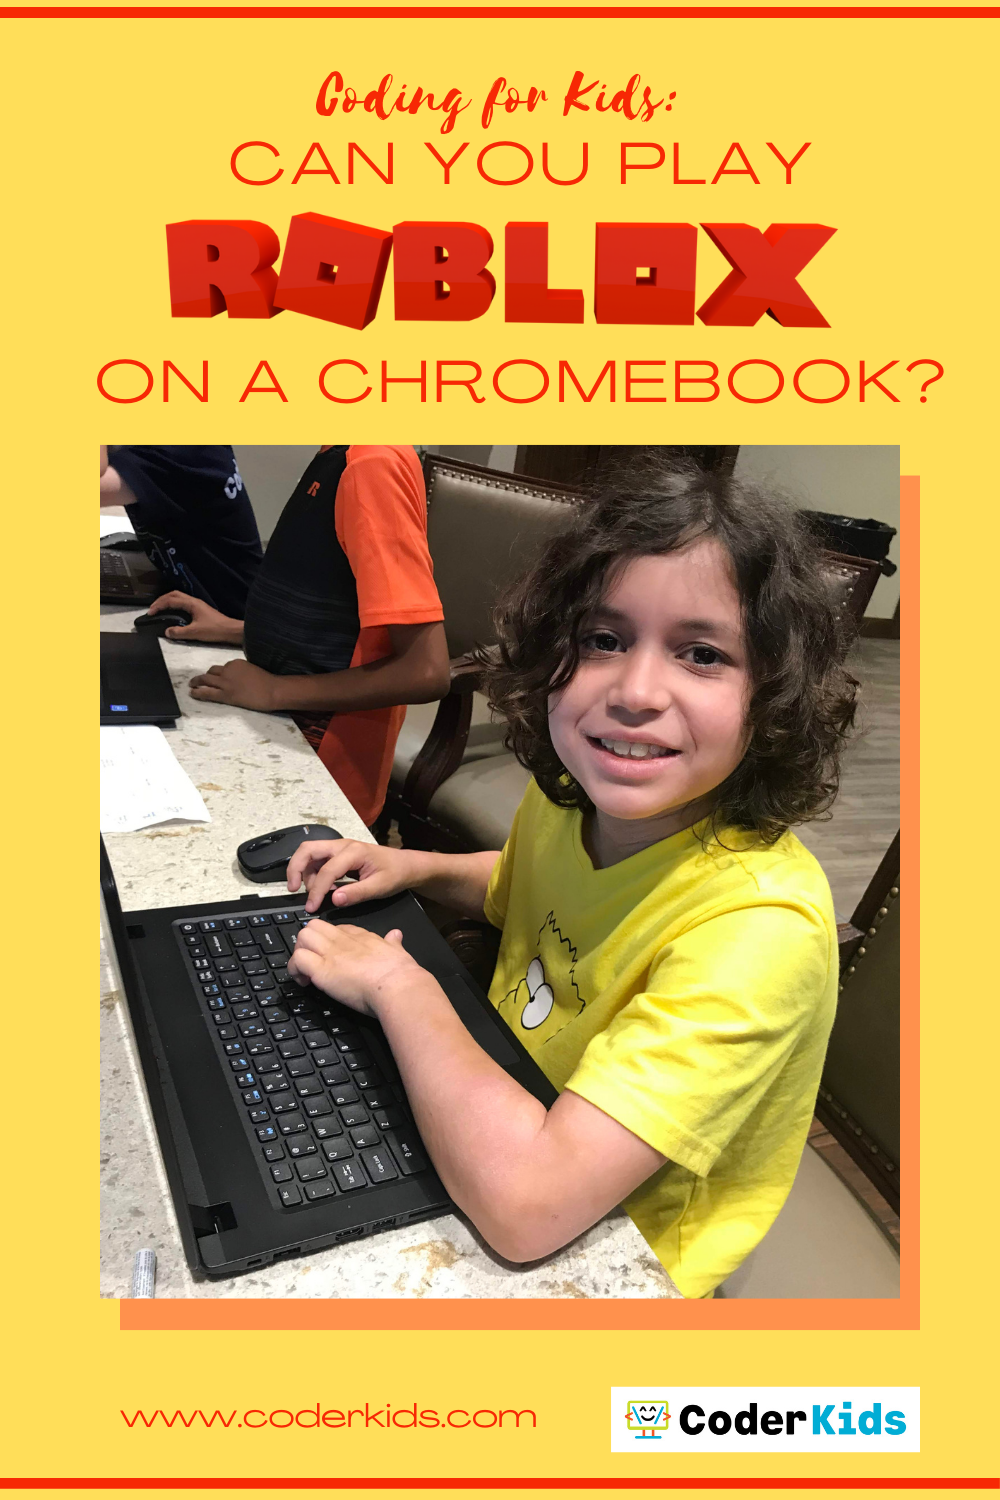 How to plsy roblox on a chromebook with no lagging the name of the